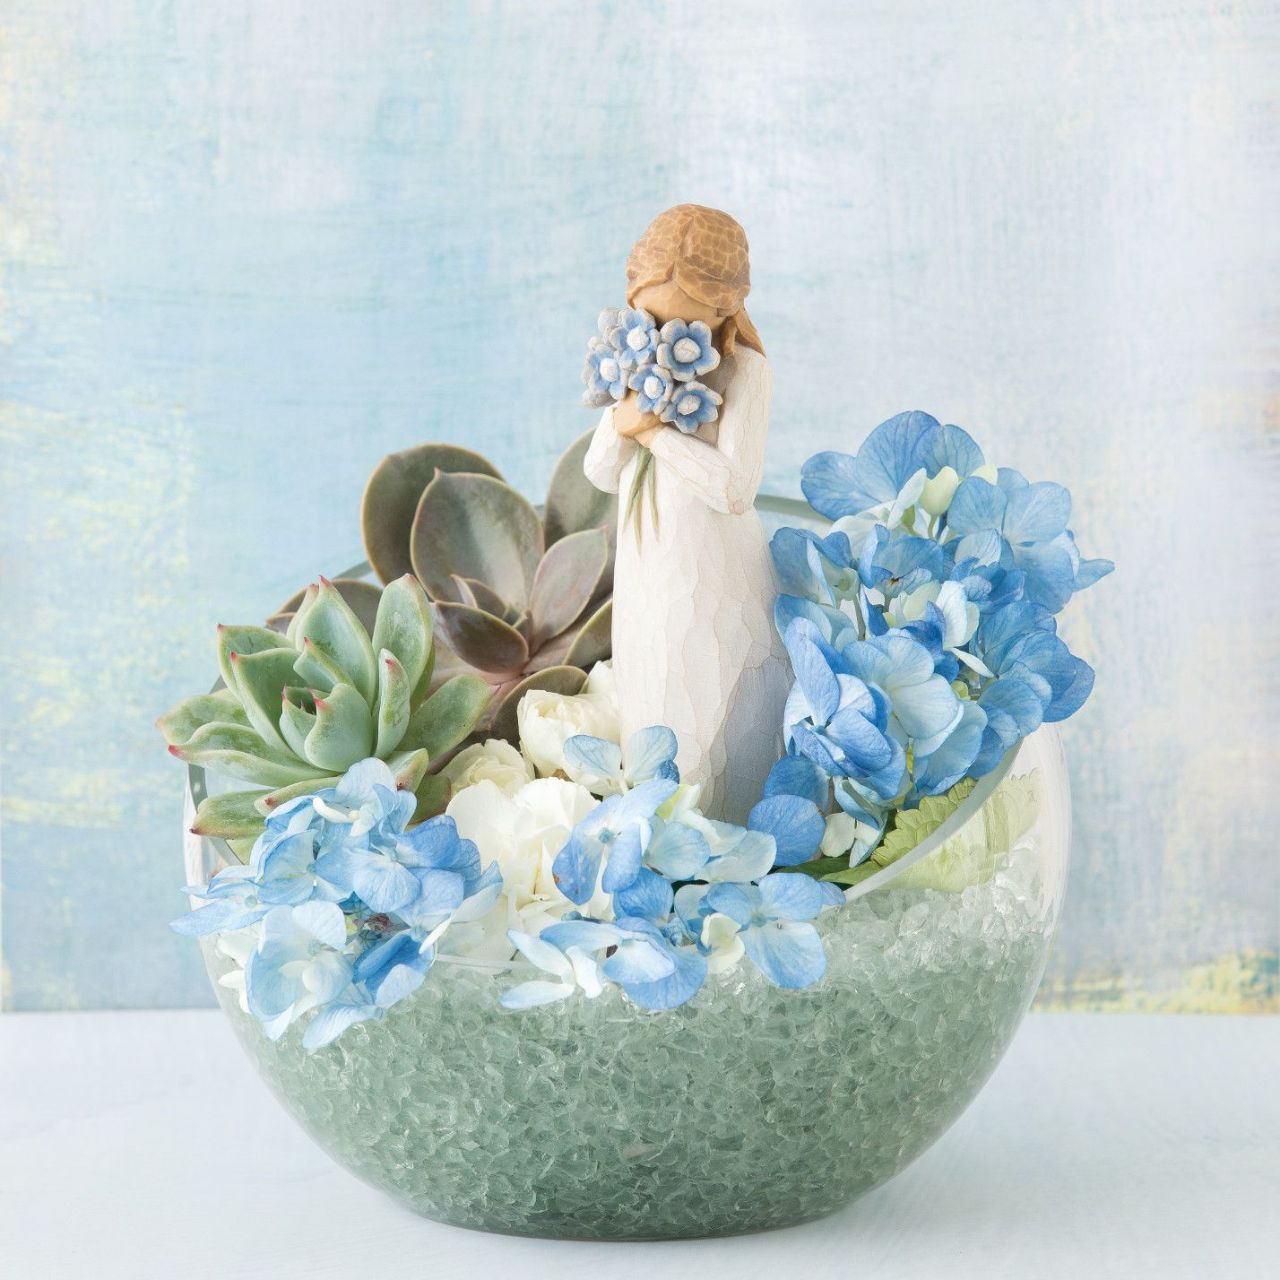 Forget-me-not by Willow Tree  A gift to express sympathy, comfort and healing ...an expression of love and caring... or for those who love flowers. Forget-me-not is a thinking of you piece, with a universal message. She represents timeless friendship and love that spans any distance.